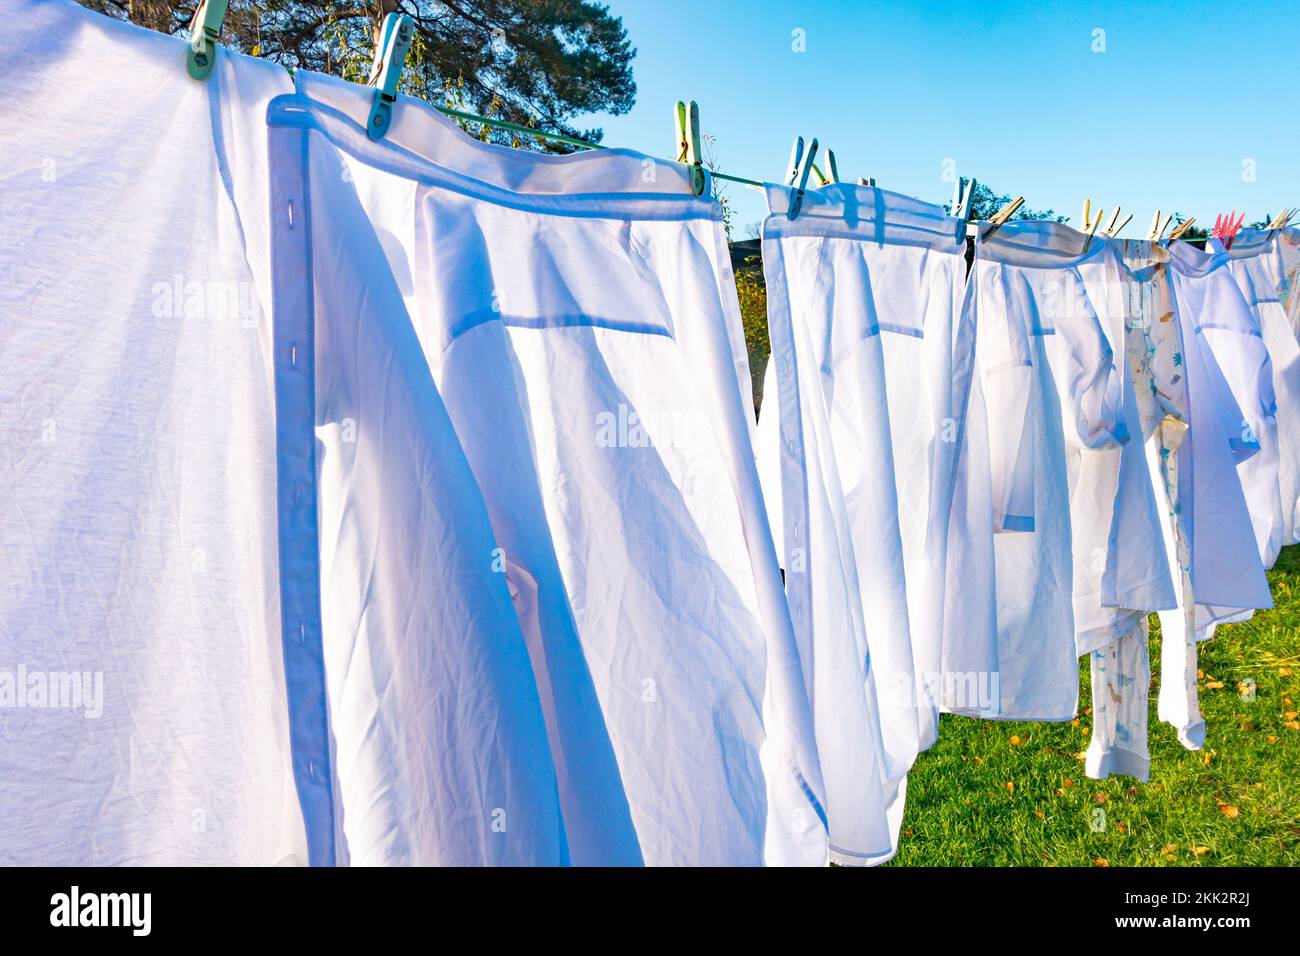 Outdoor clothes drying solution on a sunny day on Craiyon